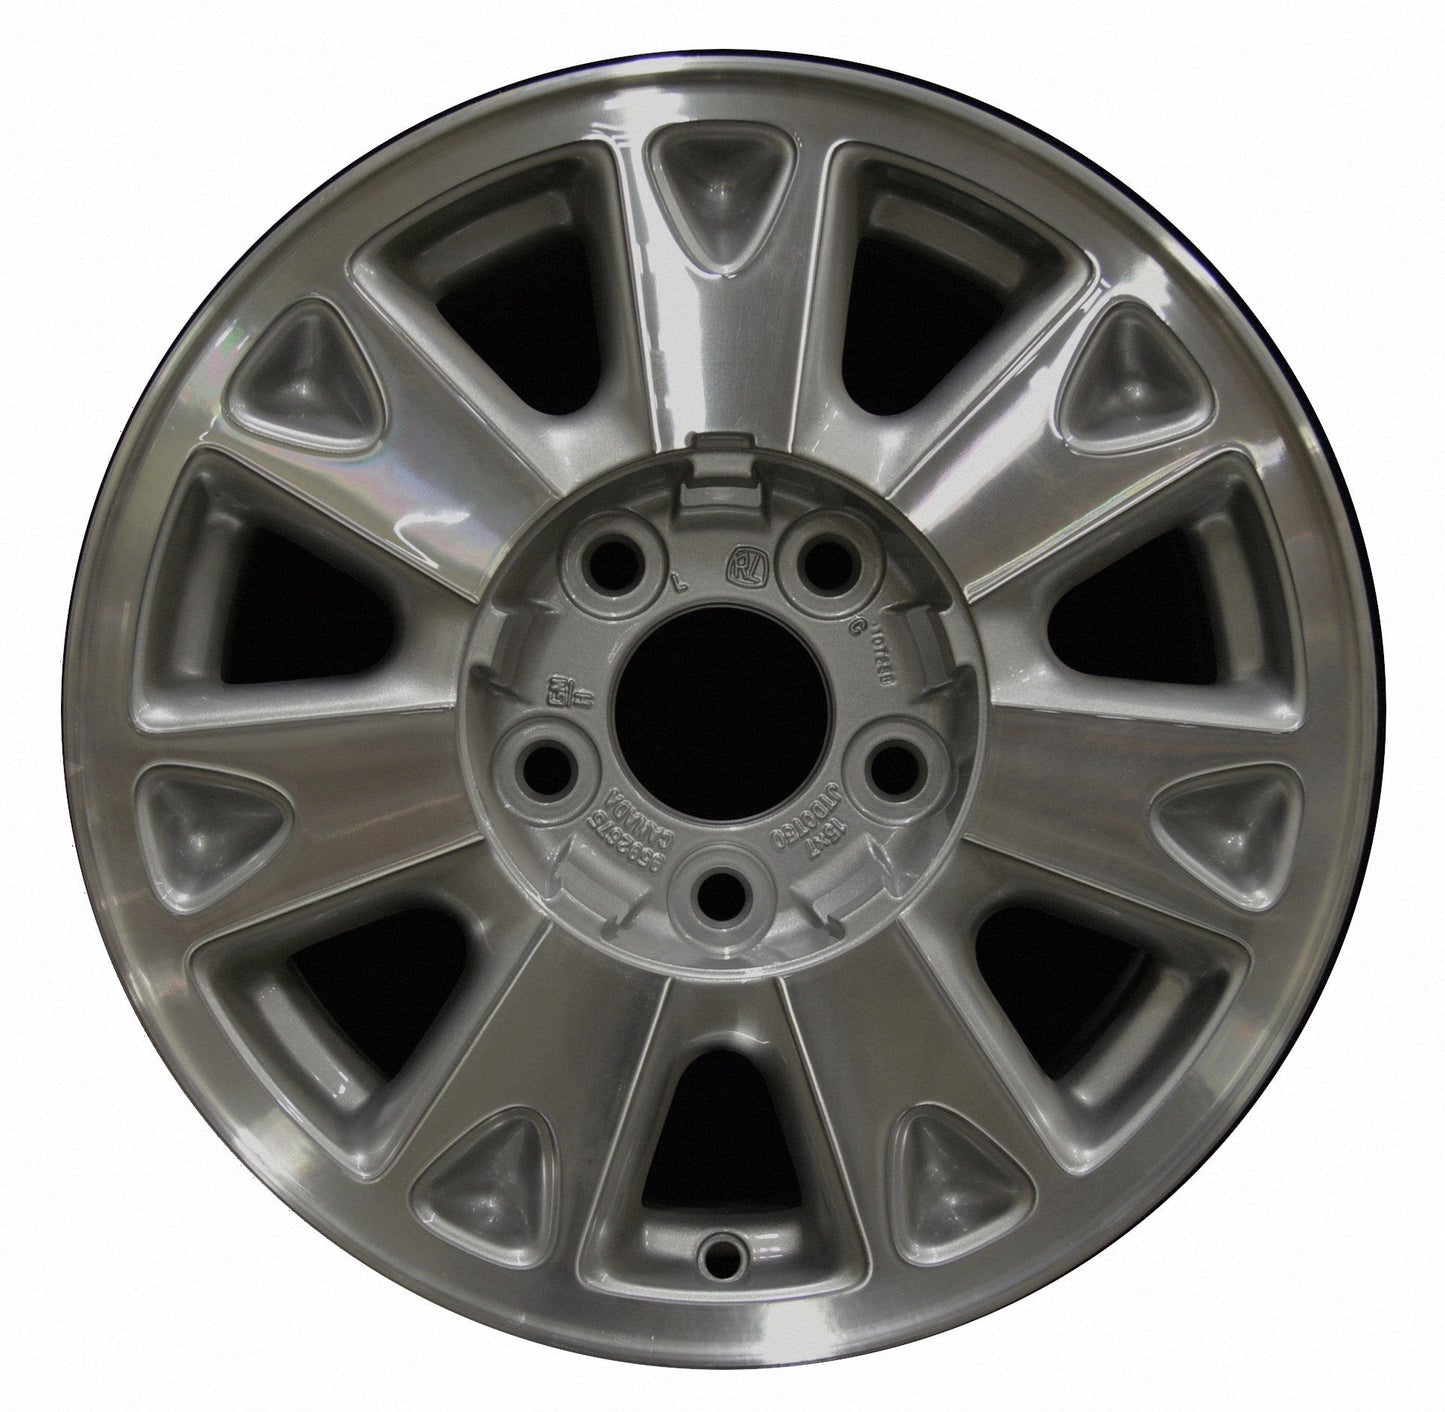 Chevrolet S10 Truck  1998, 1999, 2000, 2001, 2002, 2003, 2004 Factory OEM Car Wheel Size 15x7 Alloy WAO.5064.PS01.MA